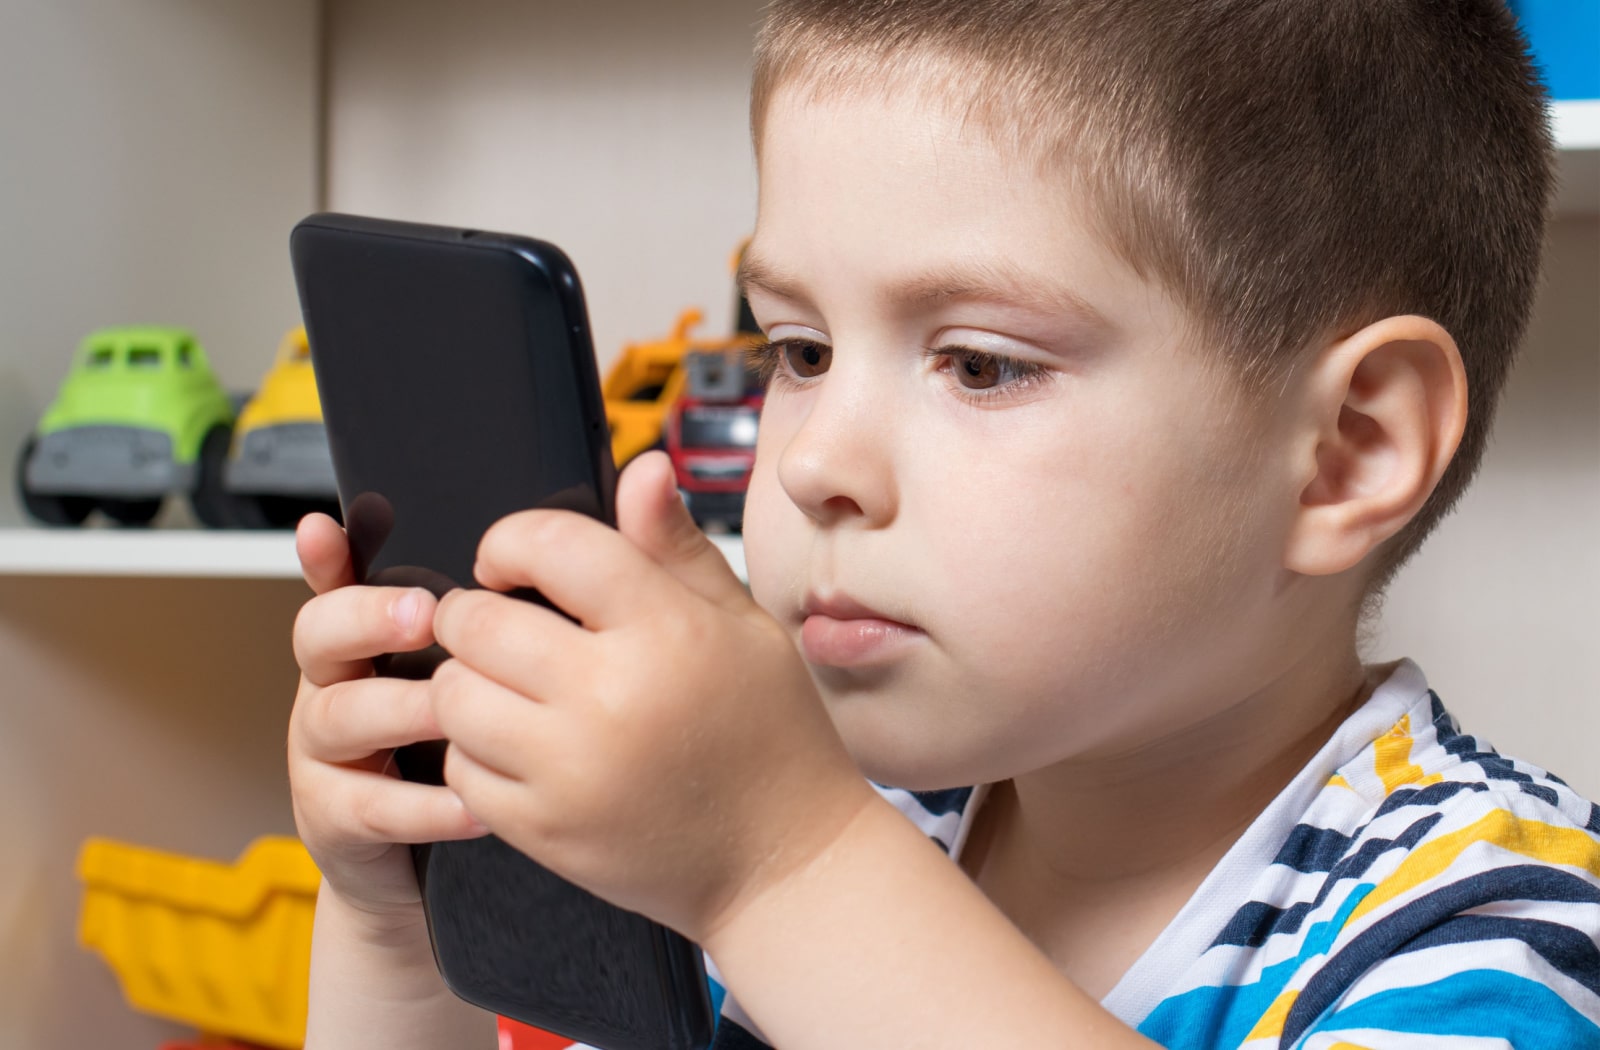 A boy child is holding a smartphone toot close to his face while watching something on the phone screen